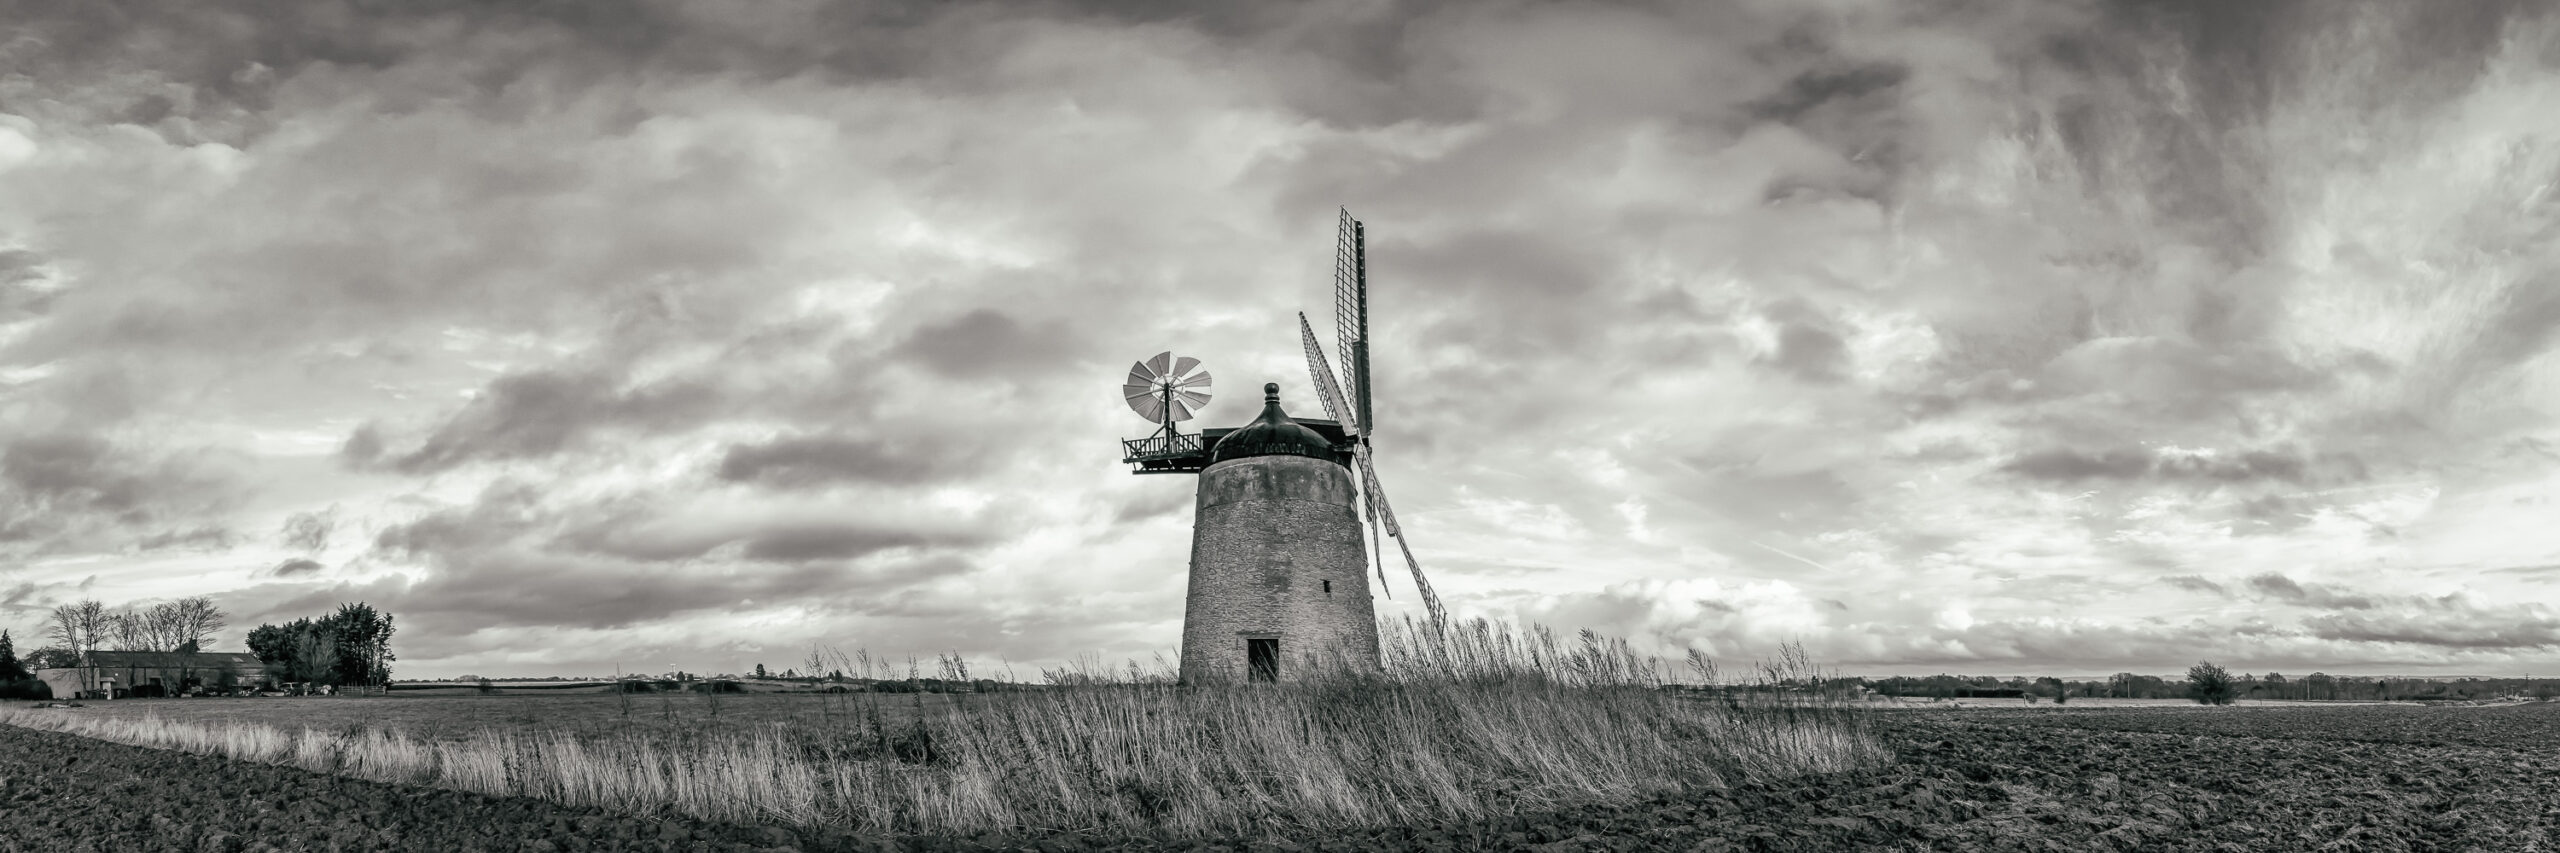 http://Great%20Haseley%20Windmill